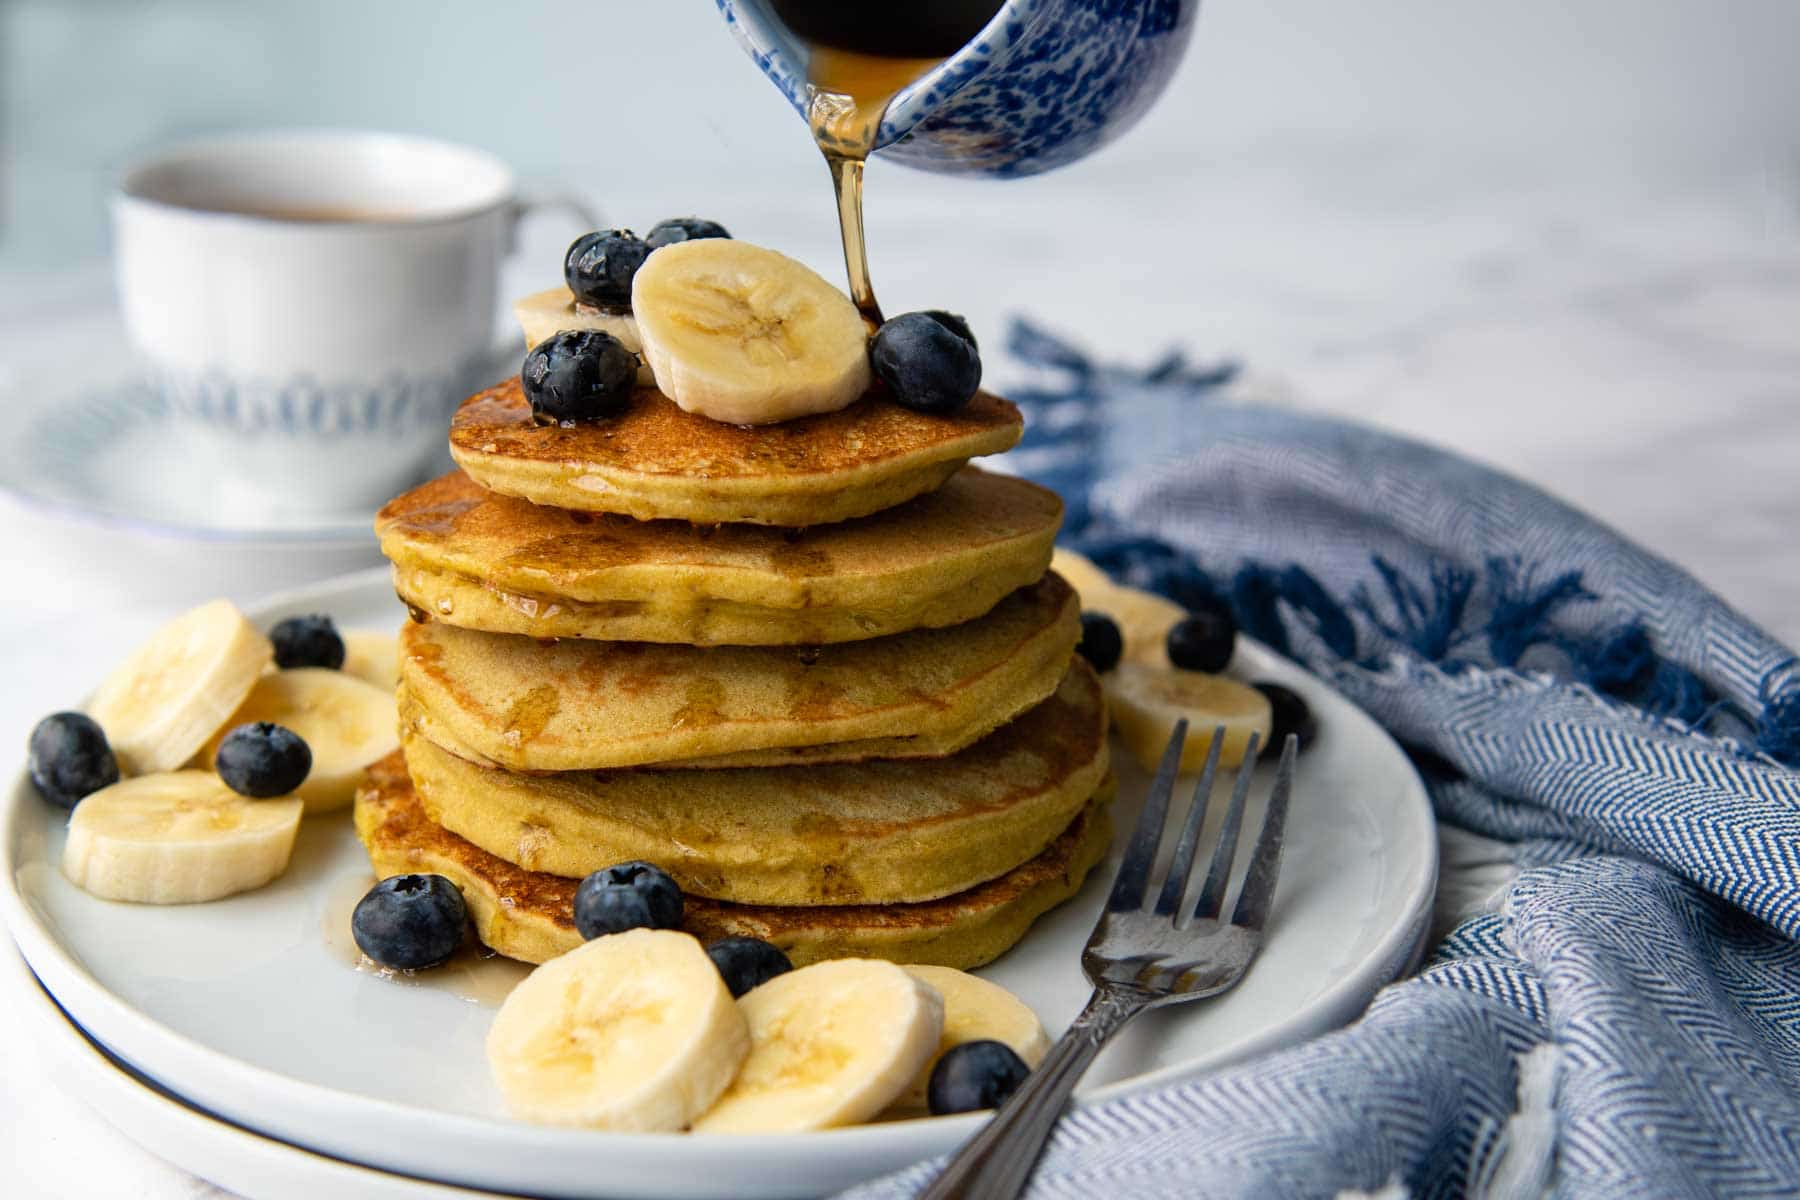 a small blue carafe pouring syrup on top of the pancakes.